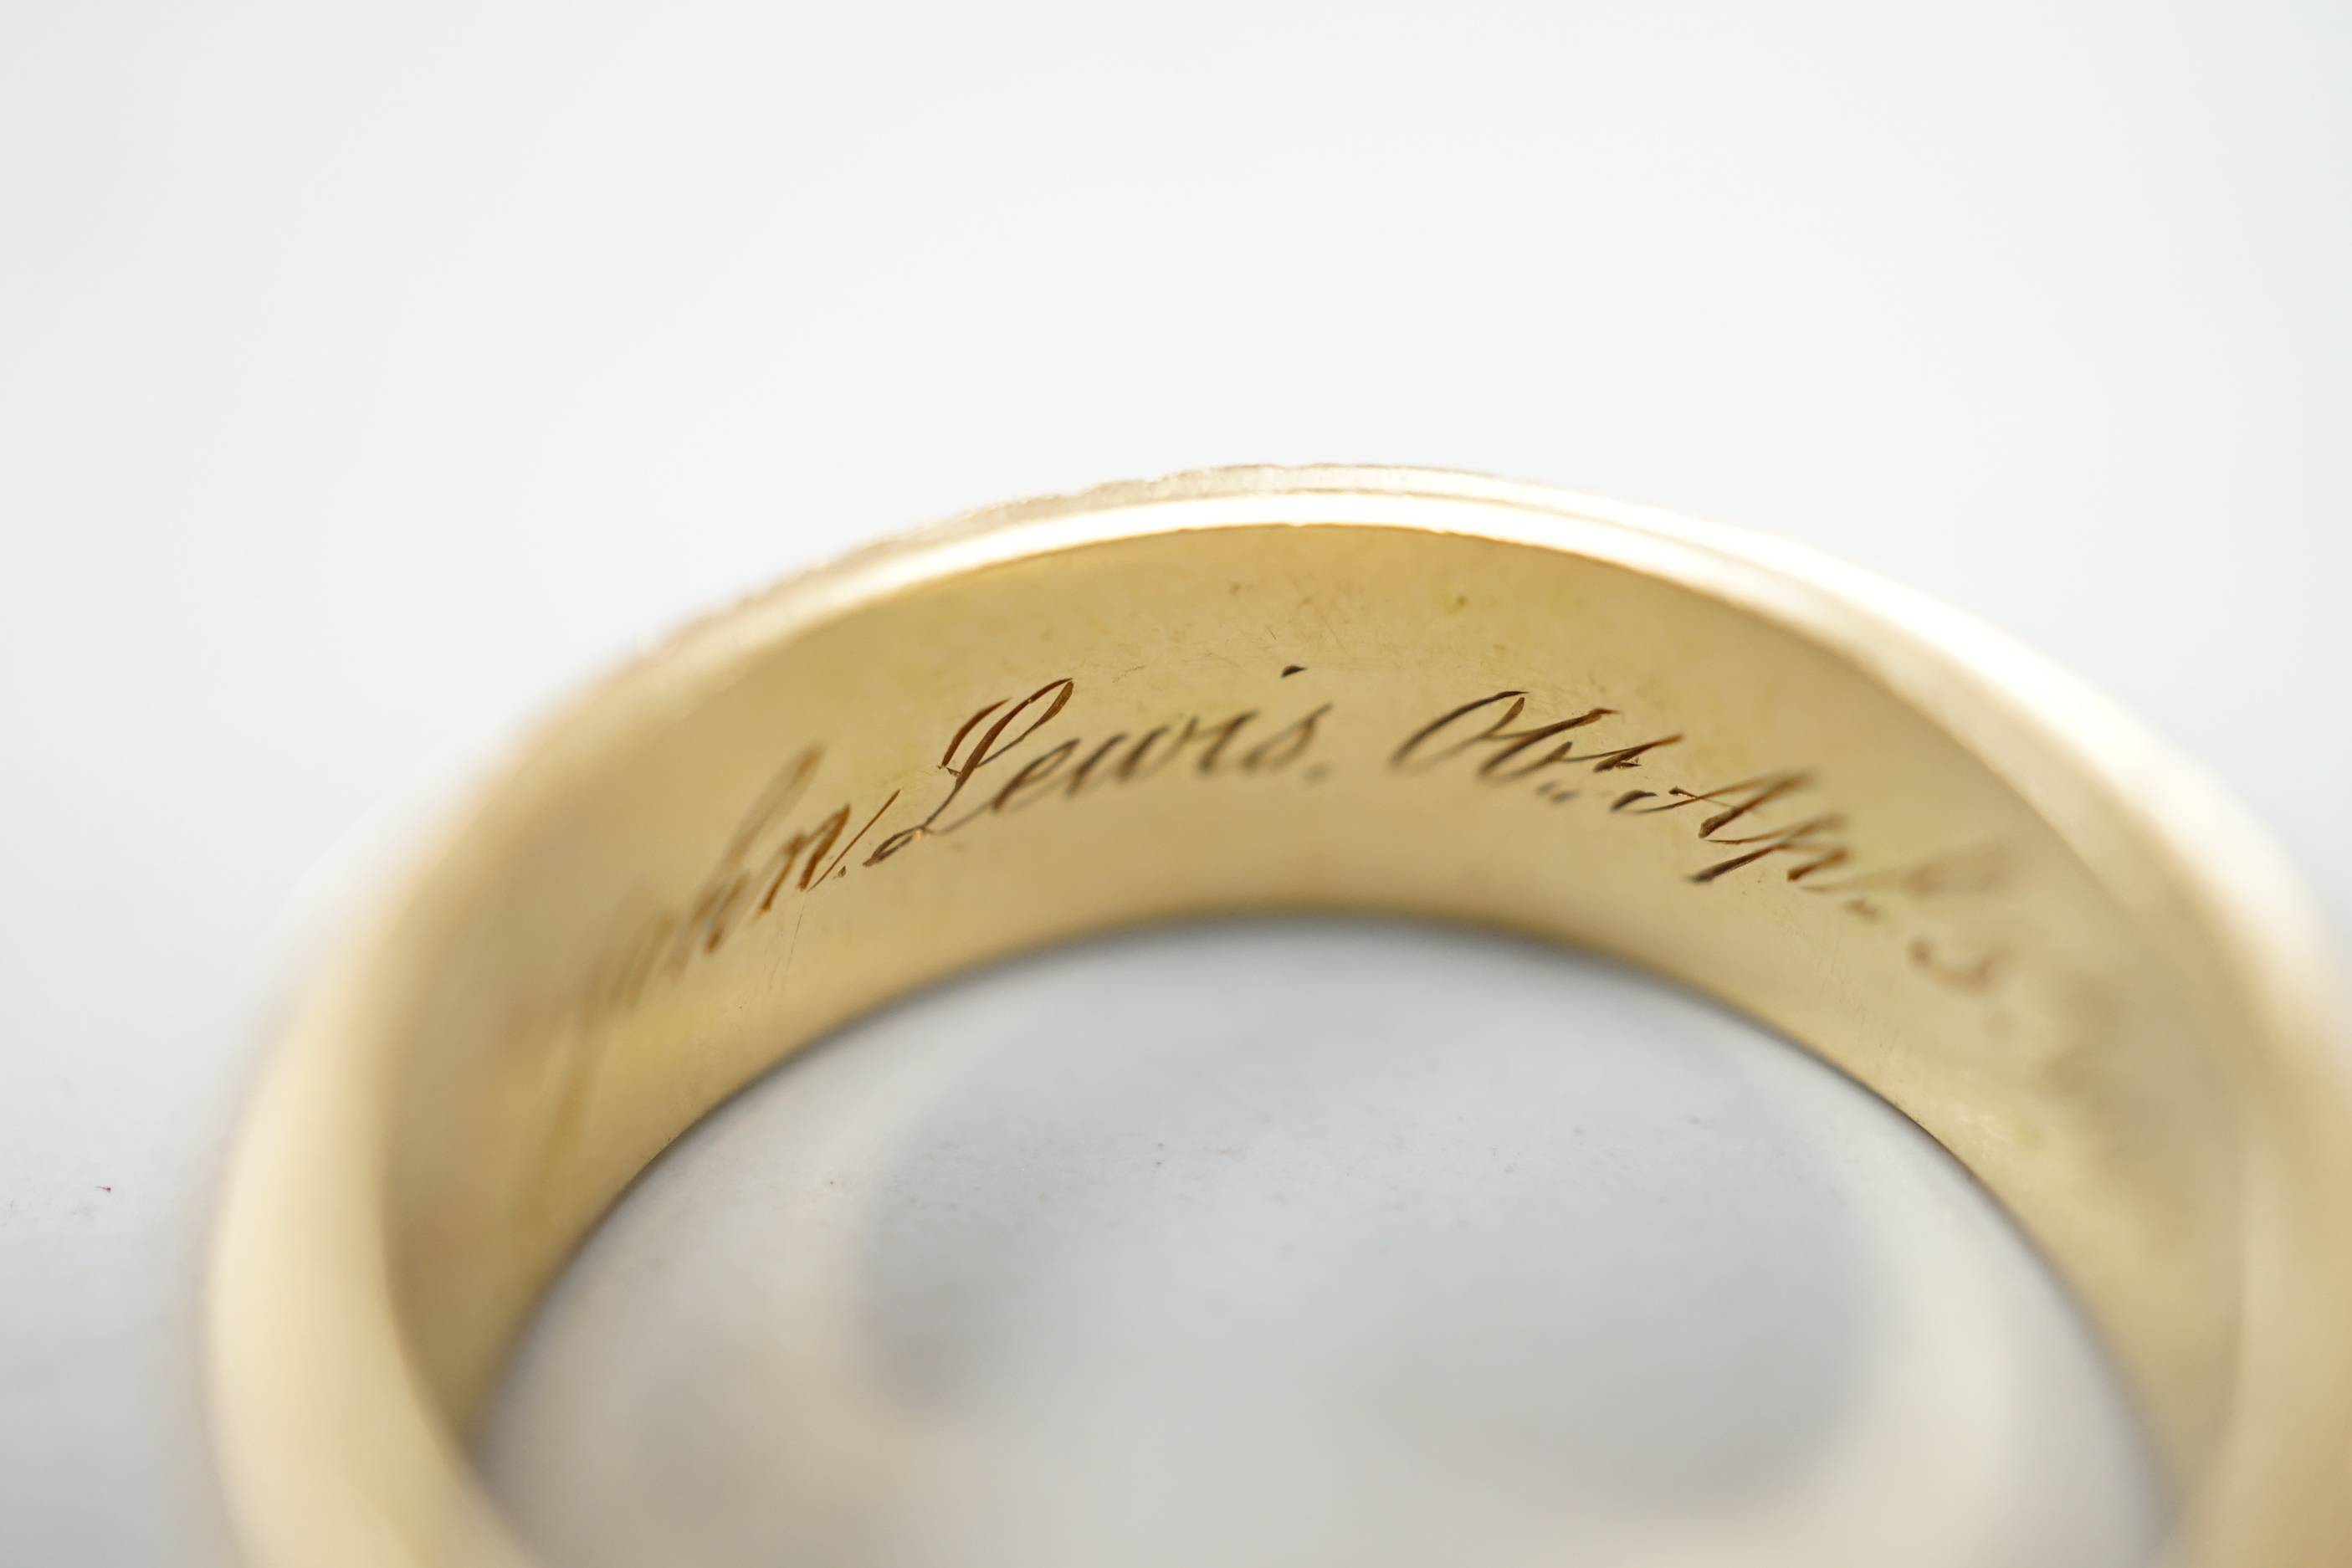 A Victorian 18ct gold and black enamel 'In Memoriam' band, inscribed ' Edwr John Lewis obt 5th April 1876, at 54', size N, gross weight 4 grams.